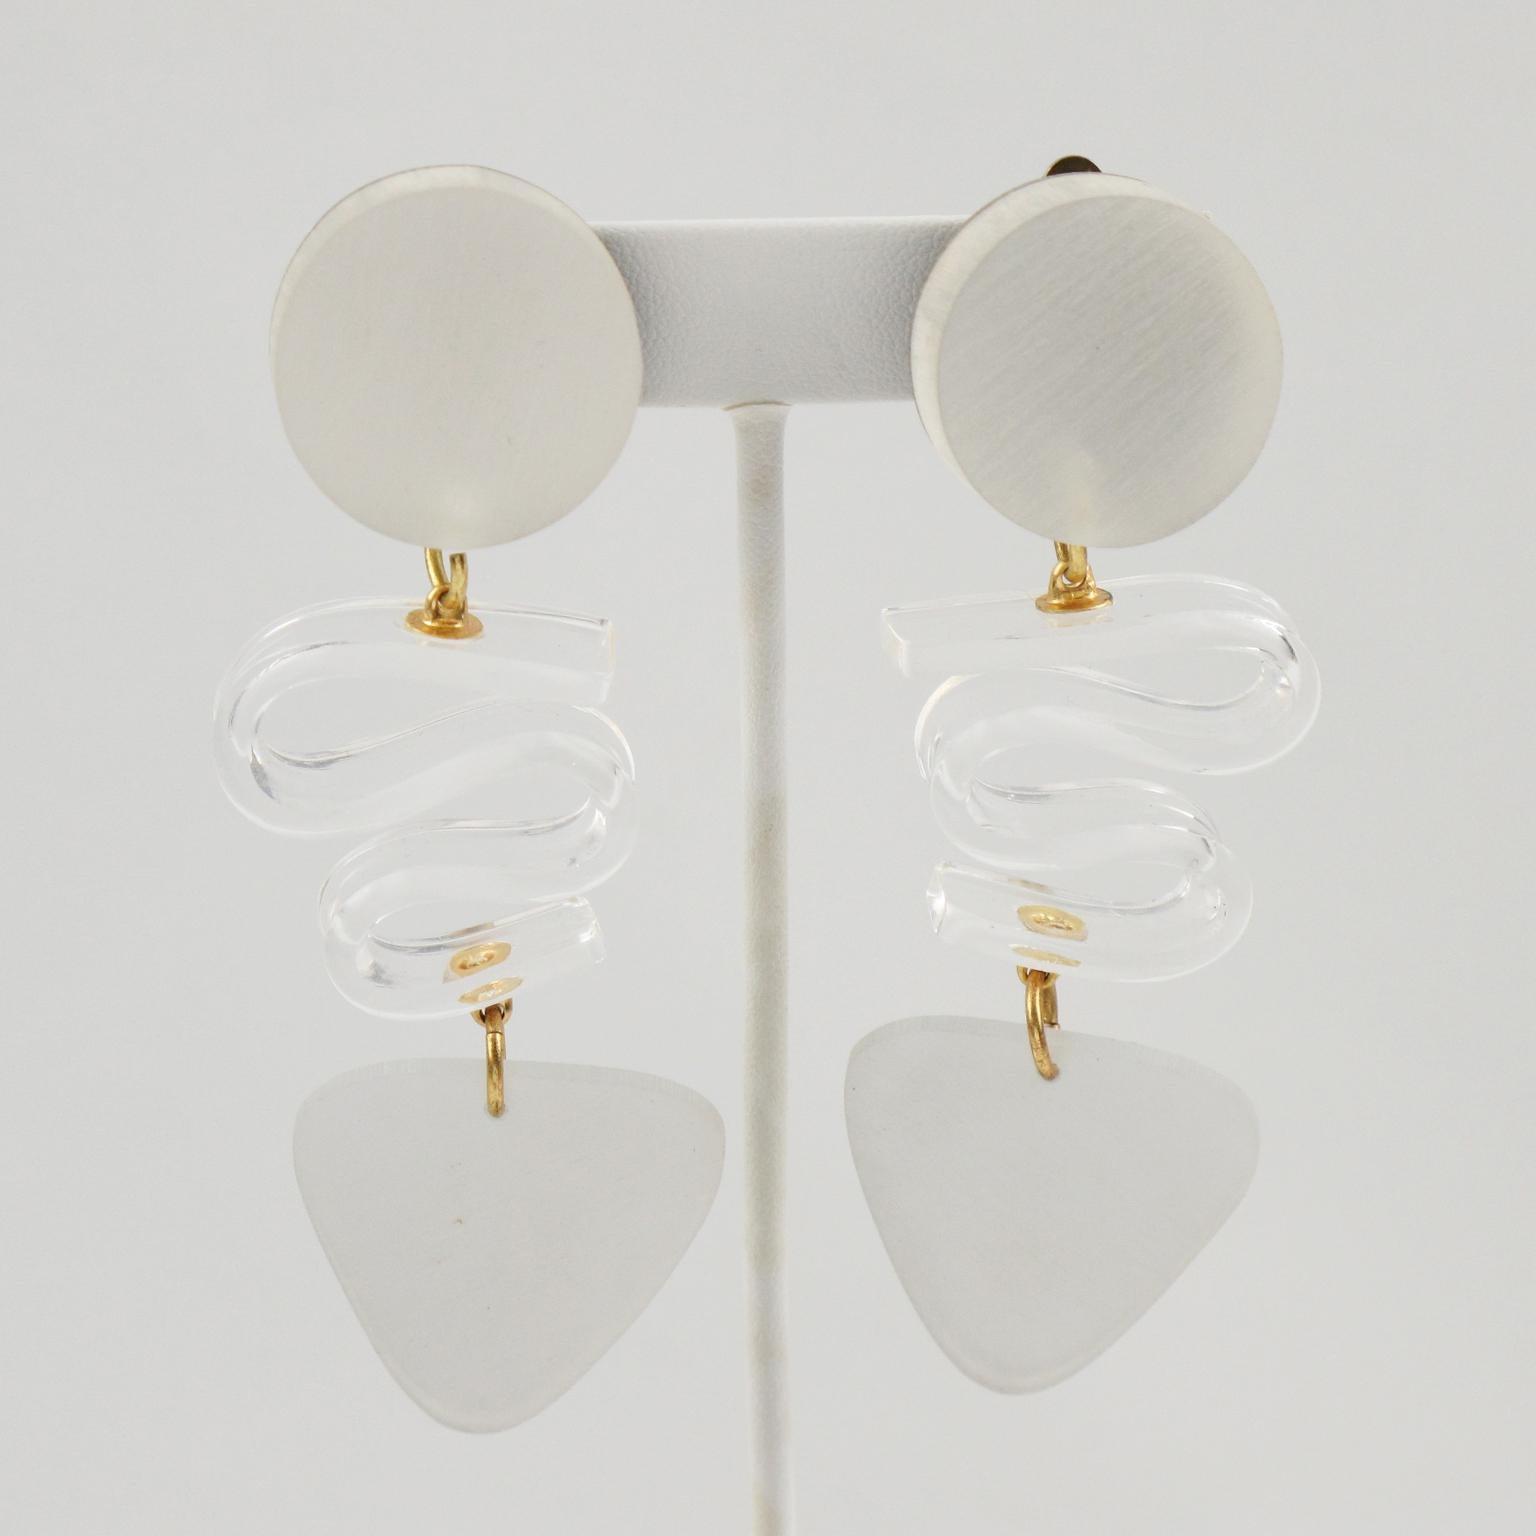 Kaso Oversized Frosted White Lucite Dangle Clip Earrings In Excellent Condition For Sale In Atlanta, GA